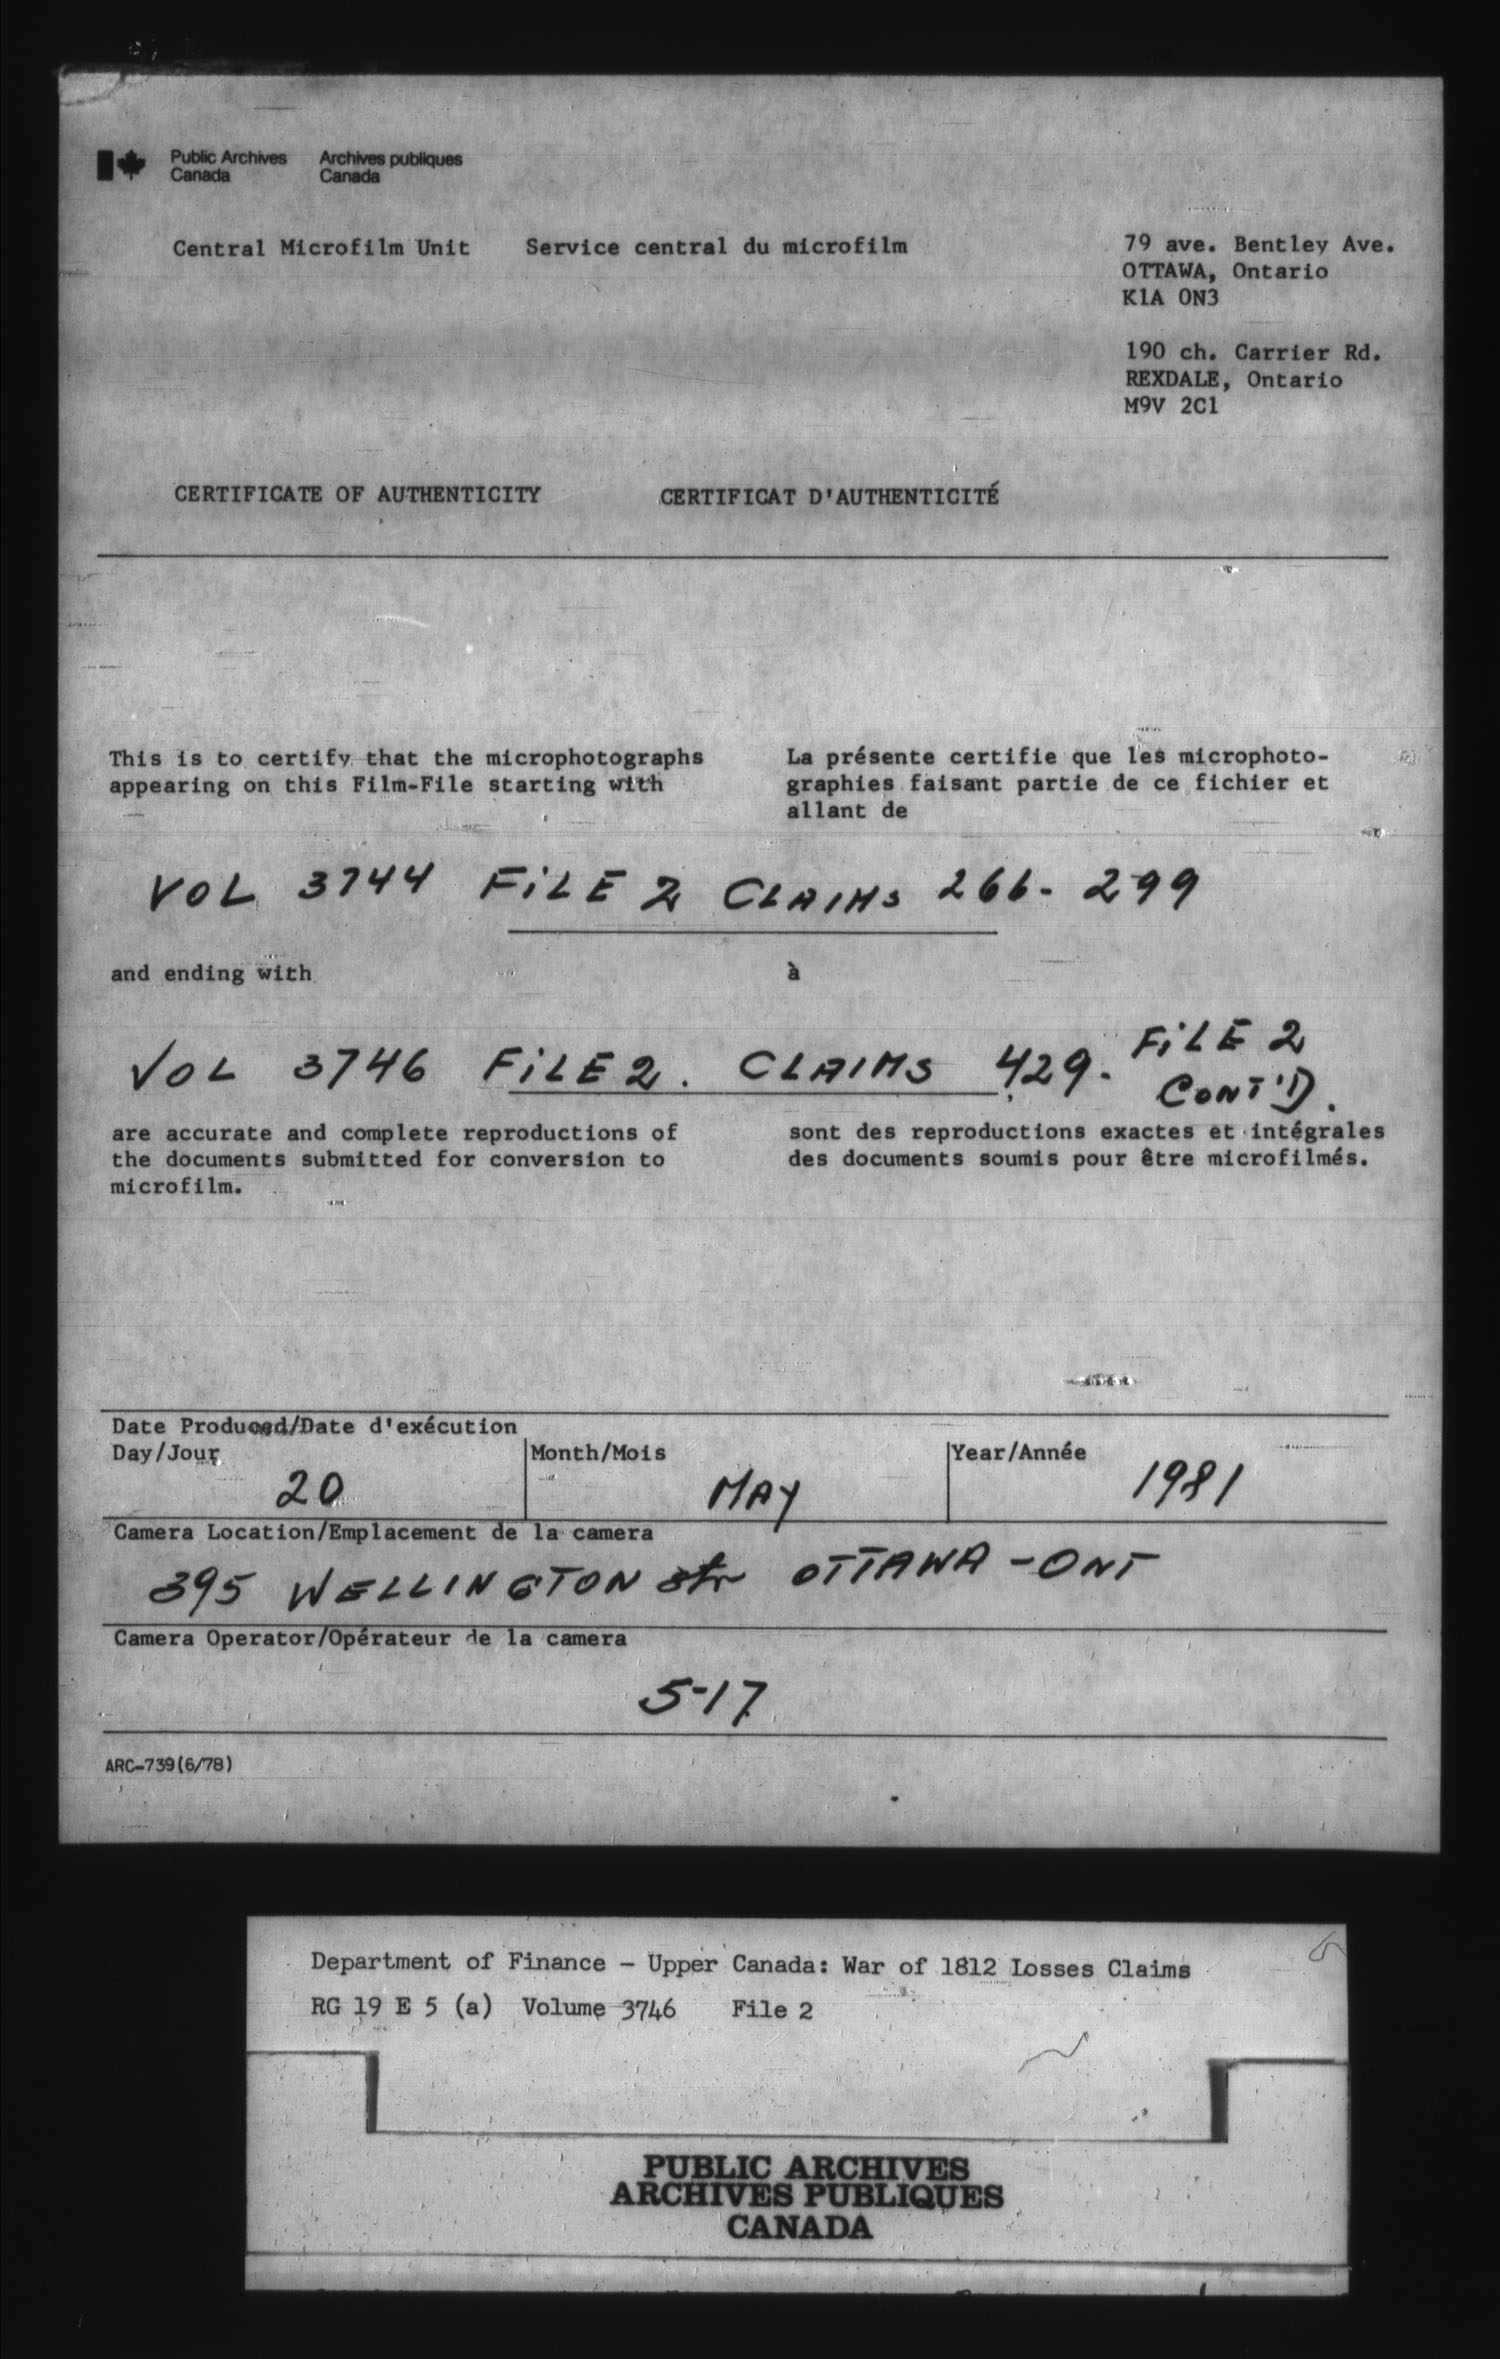 Title: War of 1812: Board of Claims for Losses, 1813-1848, RG 19 E5A - Mikan Number: 139215 - Microform: t-1129